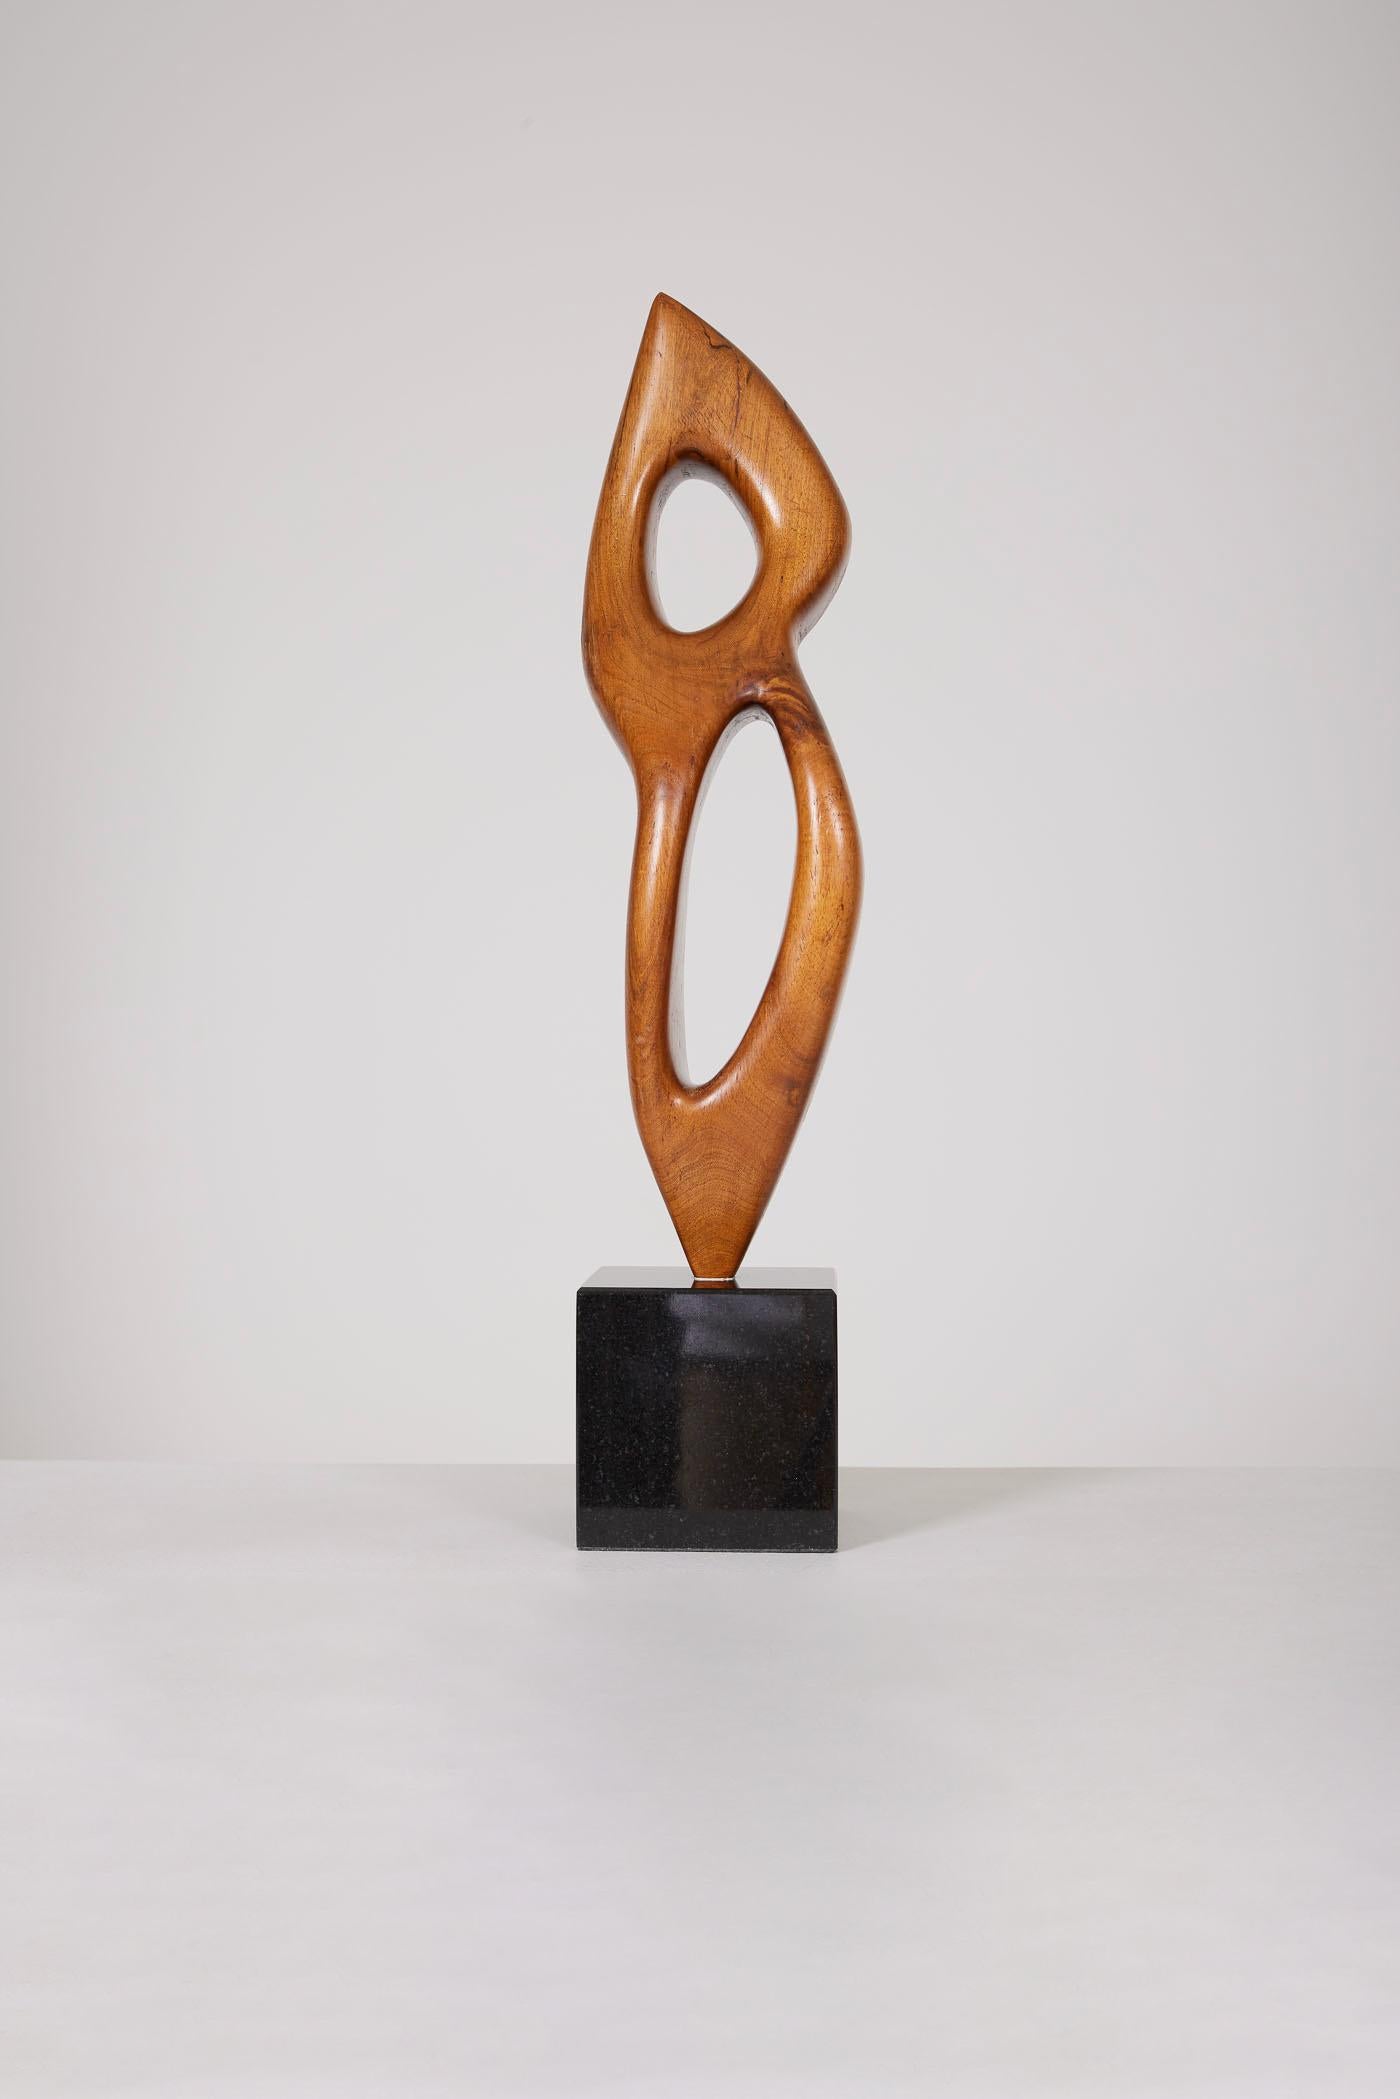  Abstract wood sculpture For Sale 4